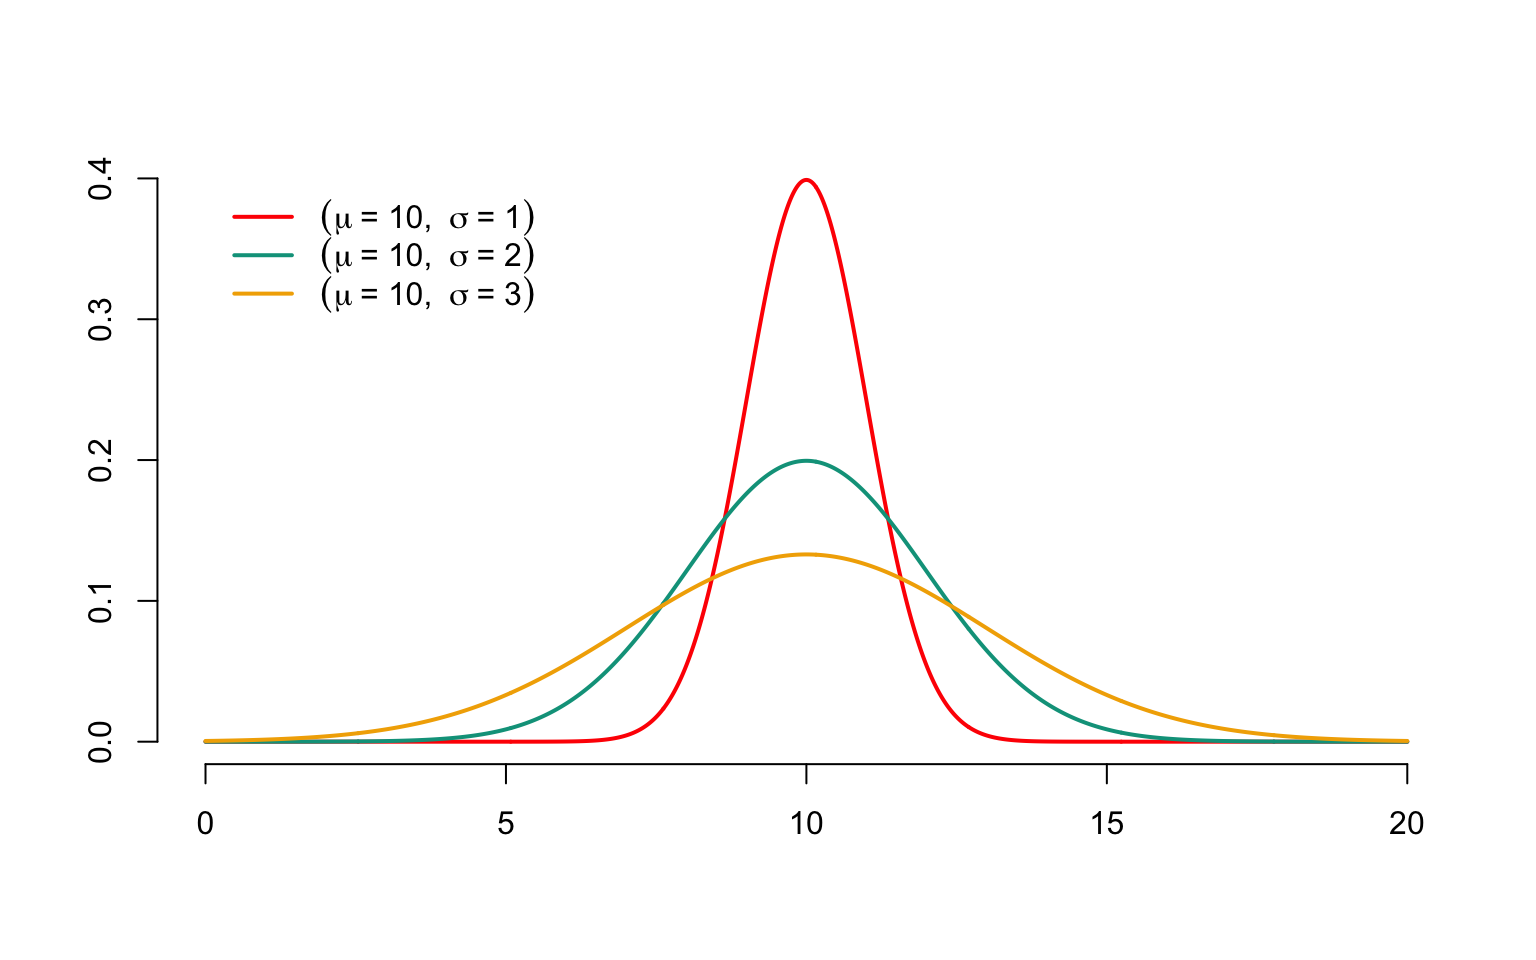 Densities of Gaussian distributions with parameters $\mu=10$ and different values for $\sigma^2$